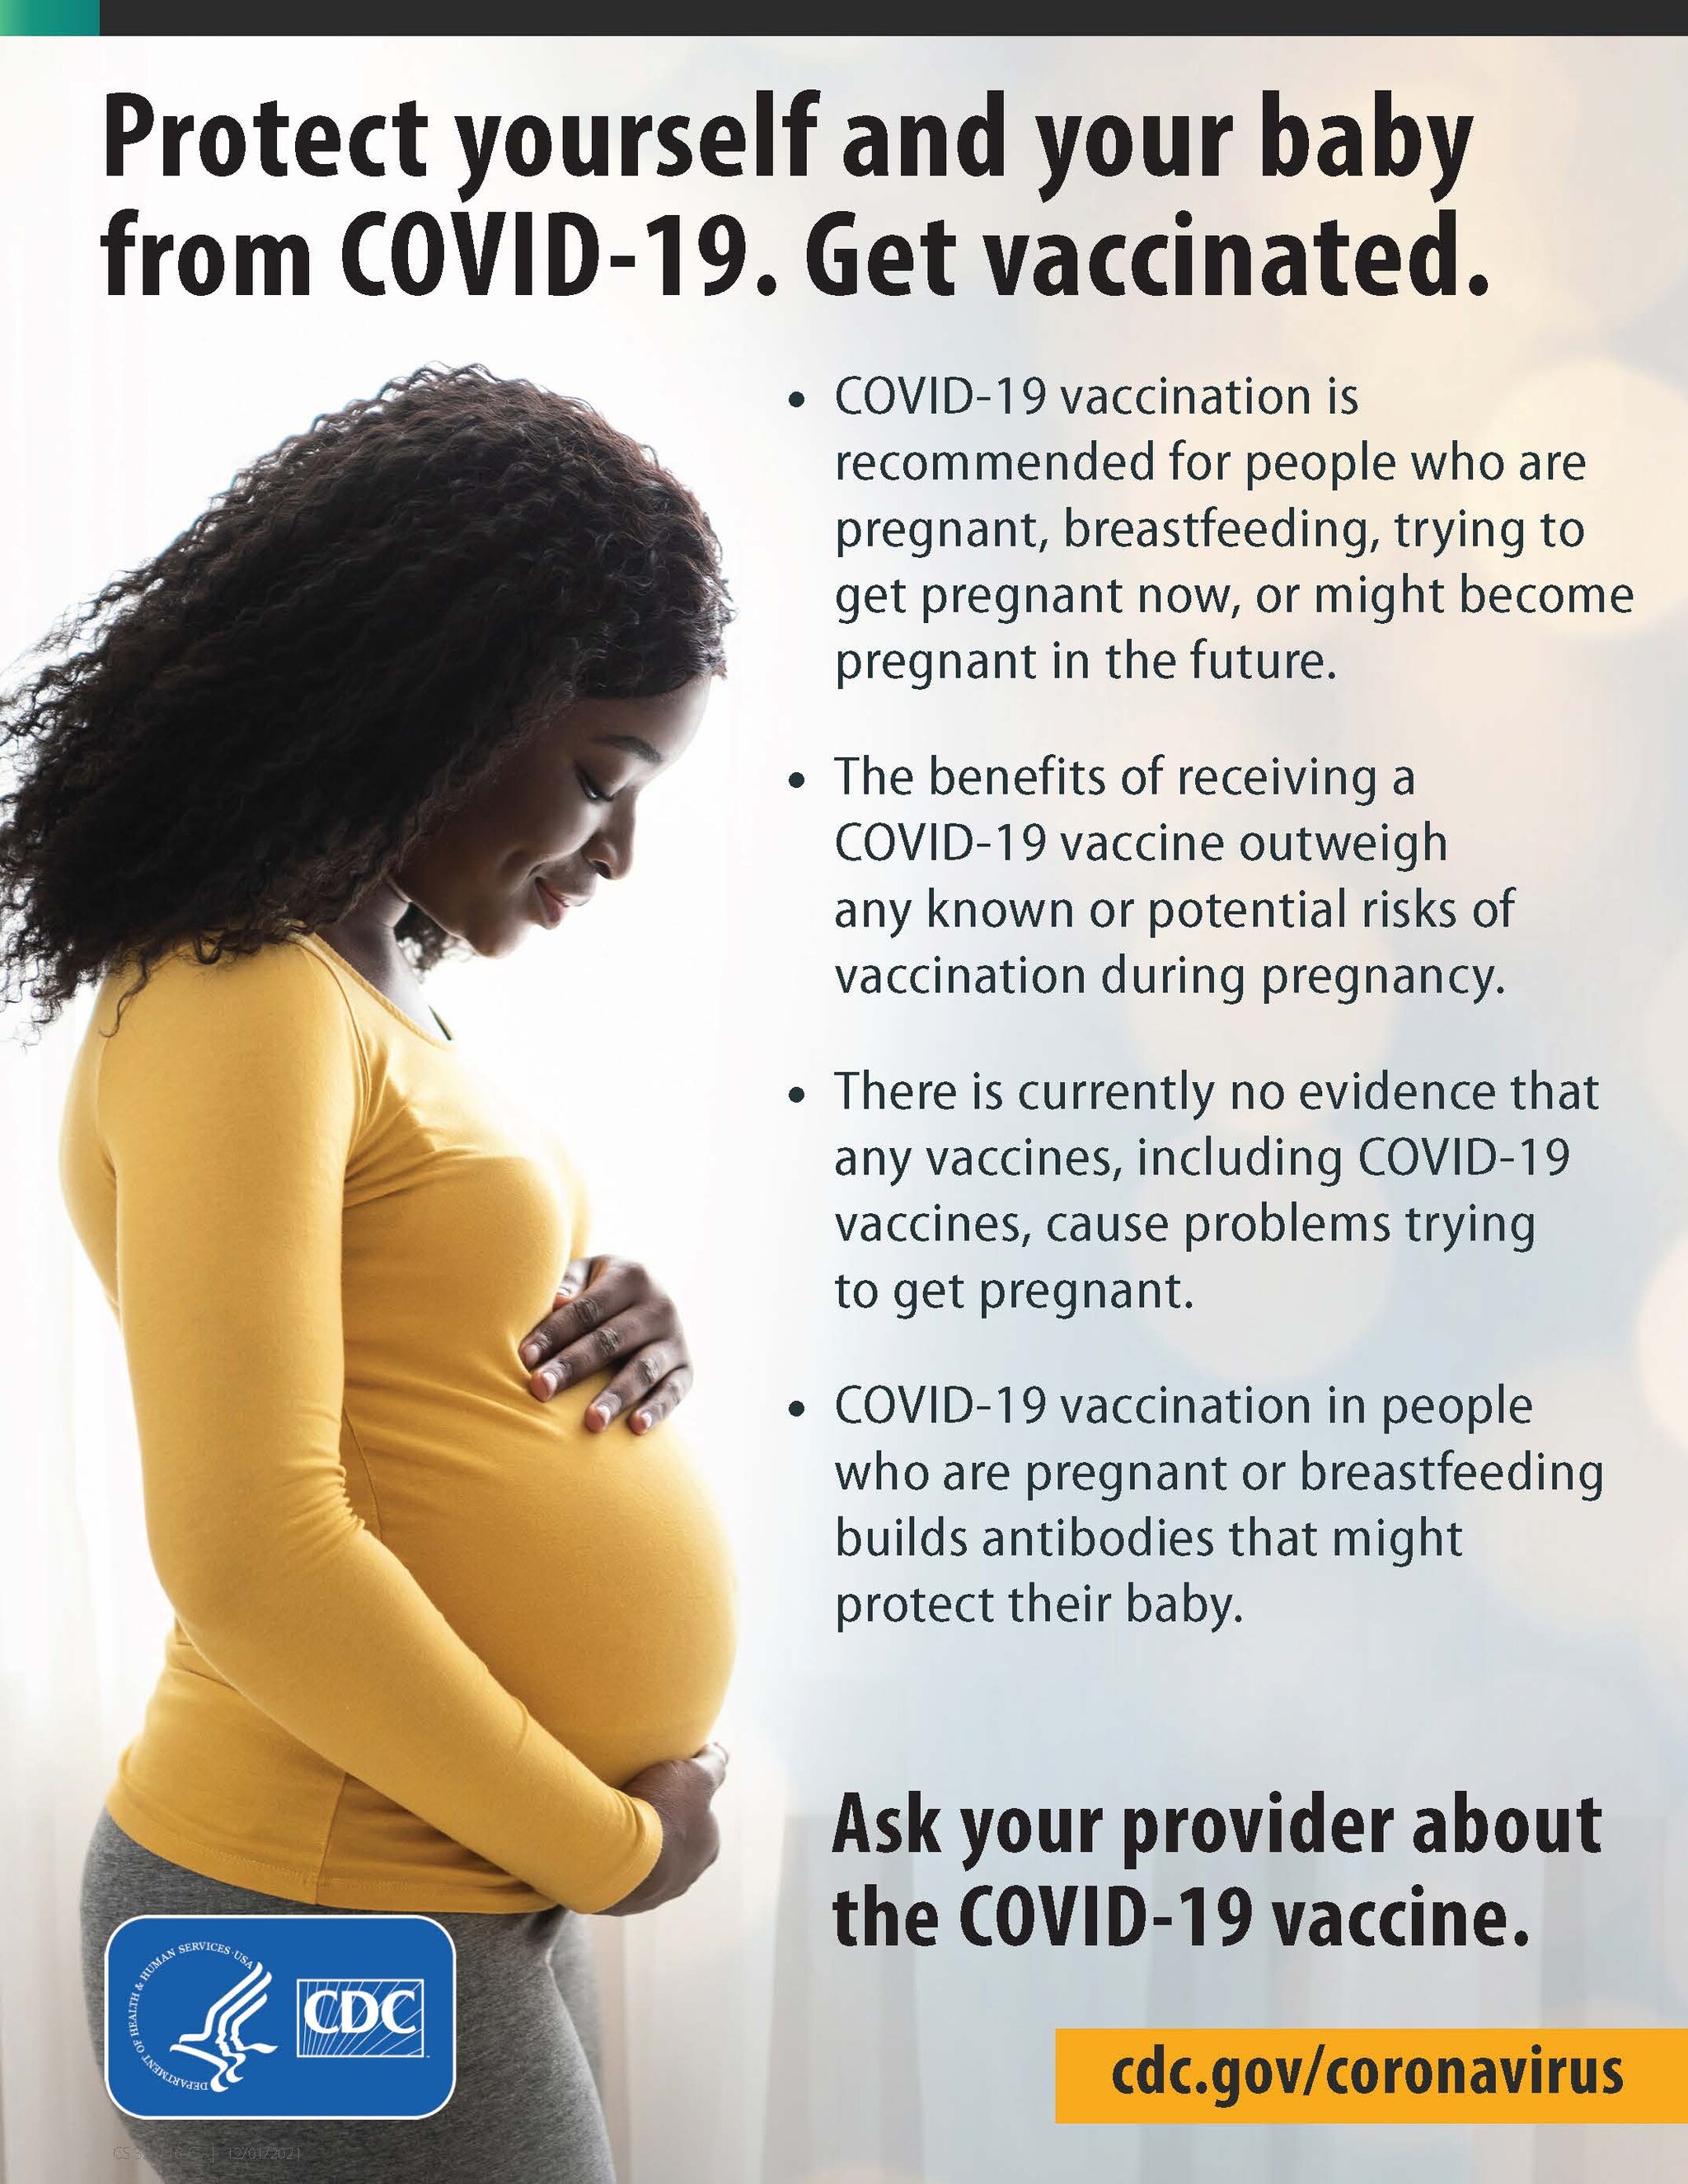 Protect yourself and your baby. Get vaccinated.